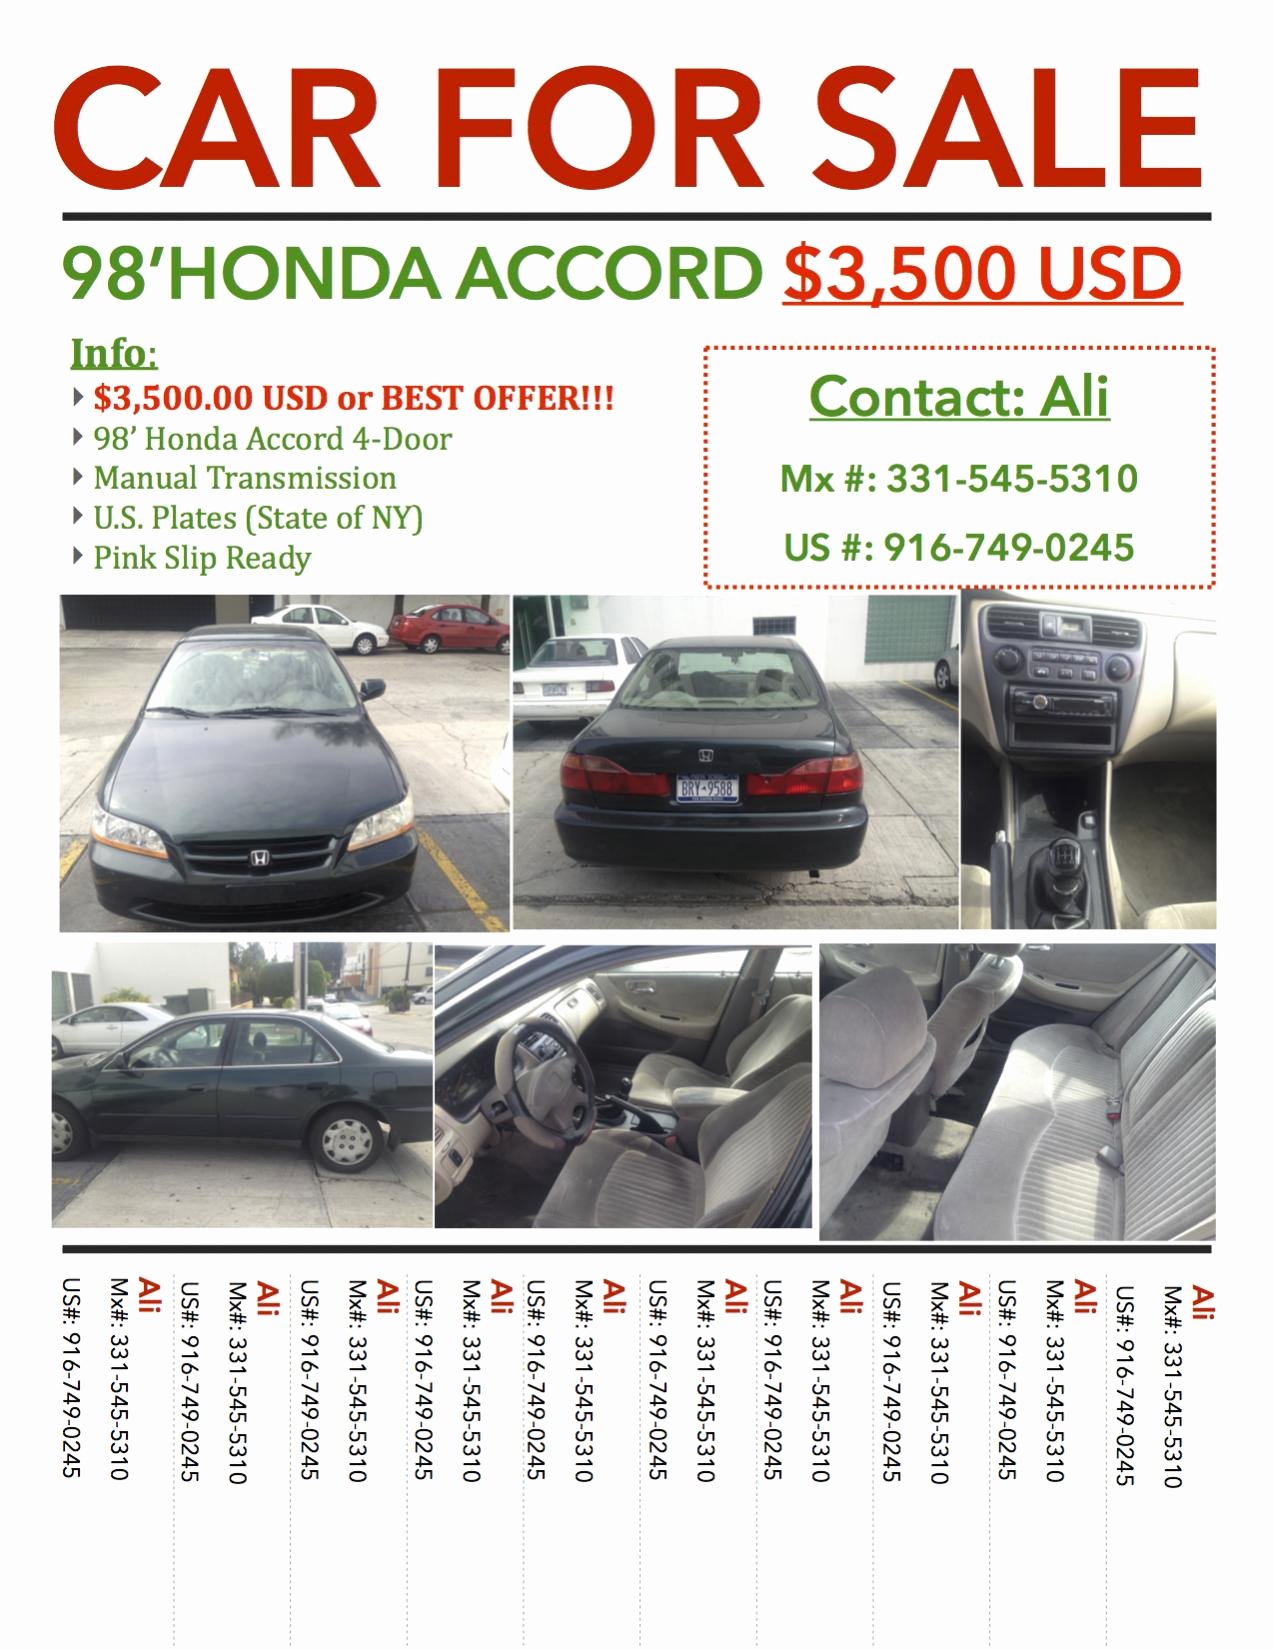 For Sale Flyer Template New Car for Sale Honda Accord